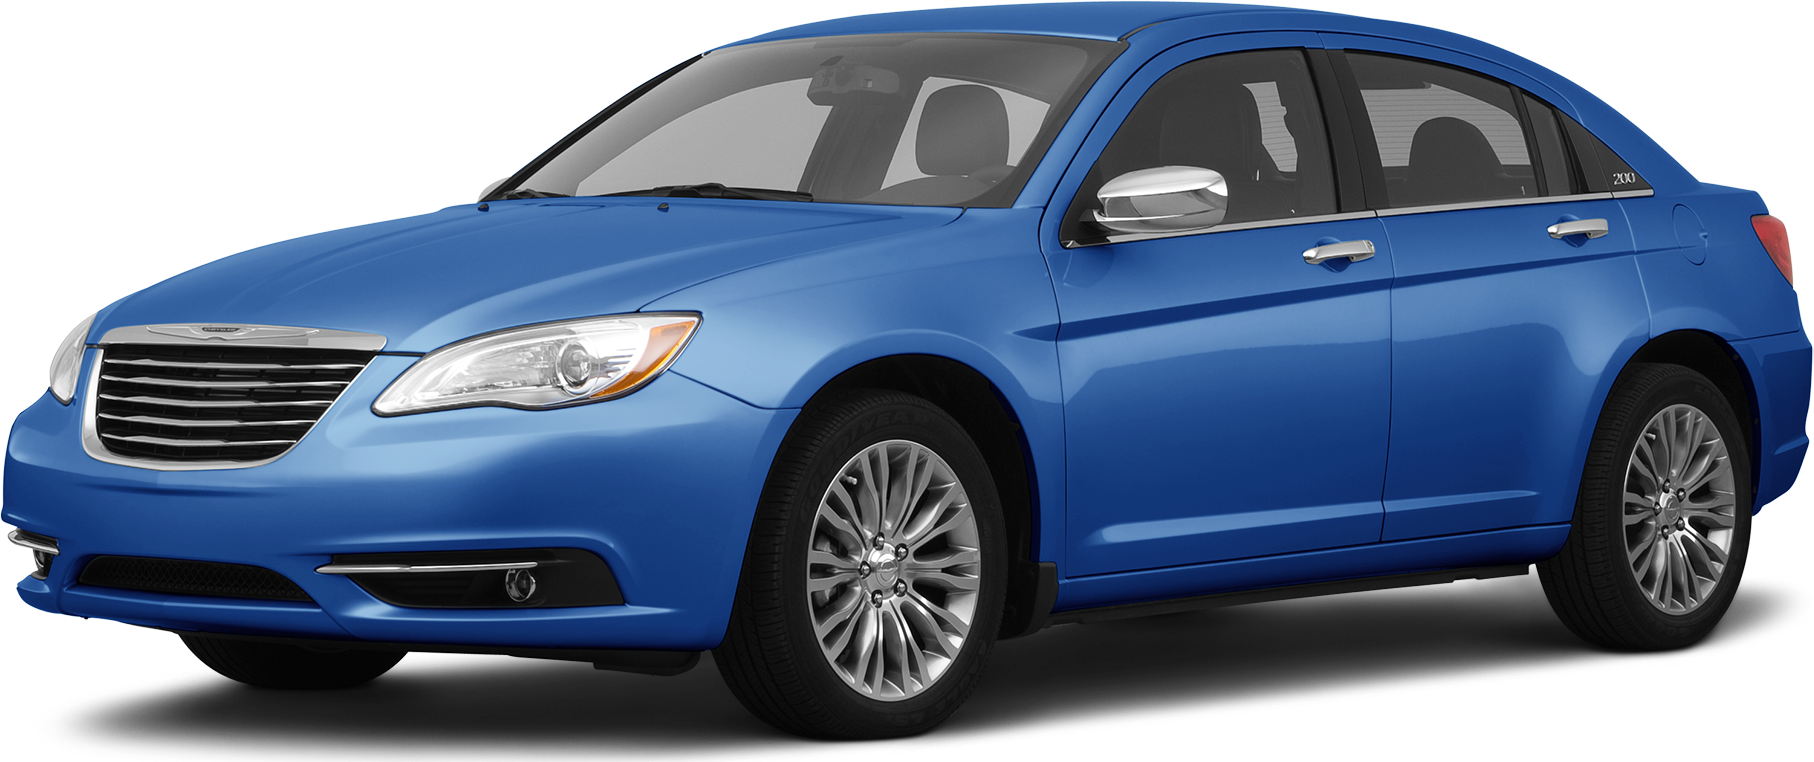 68 Top Best Writers Blue Book Value Of 2015 Chrysler 200 with Best Writers